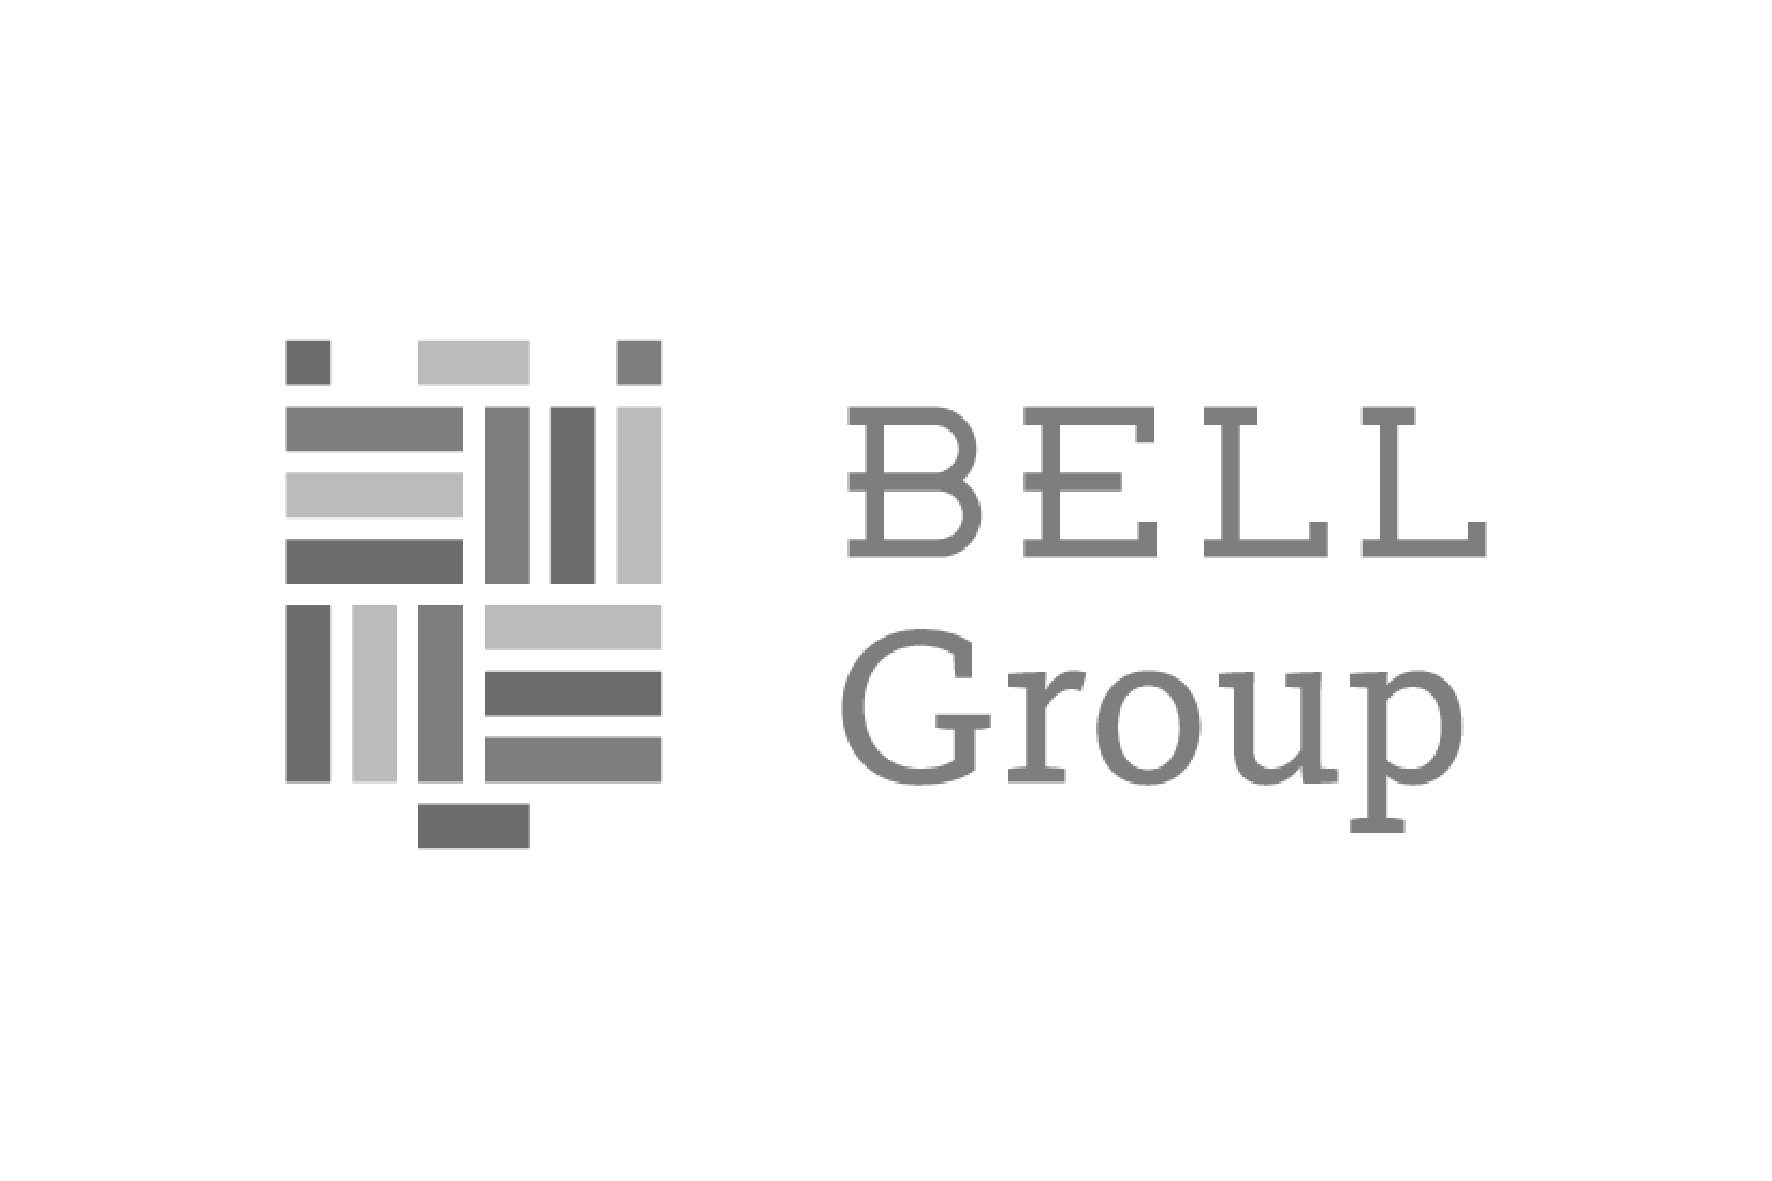 BELL GROUP REAL ESTATE